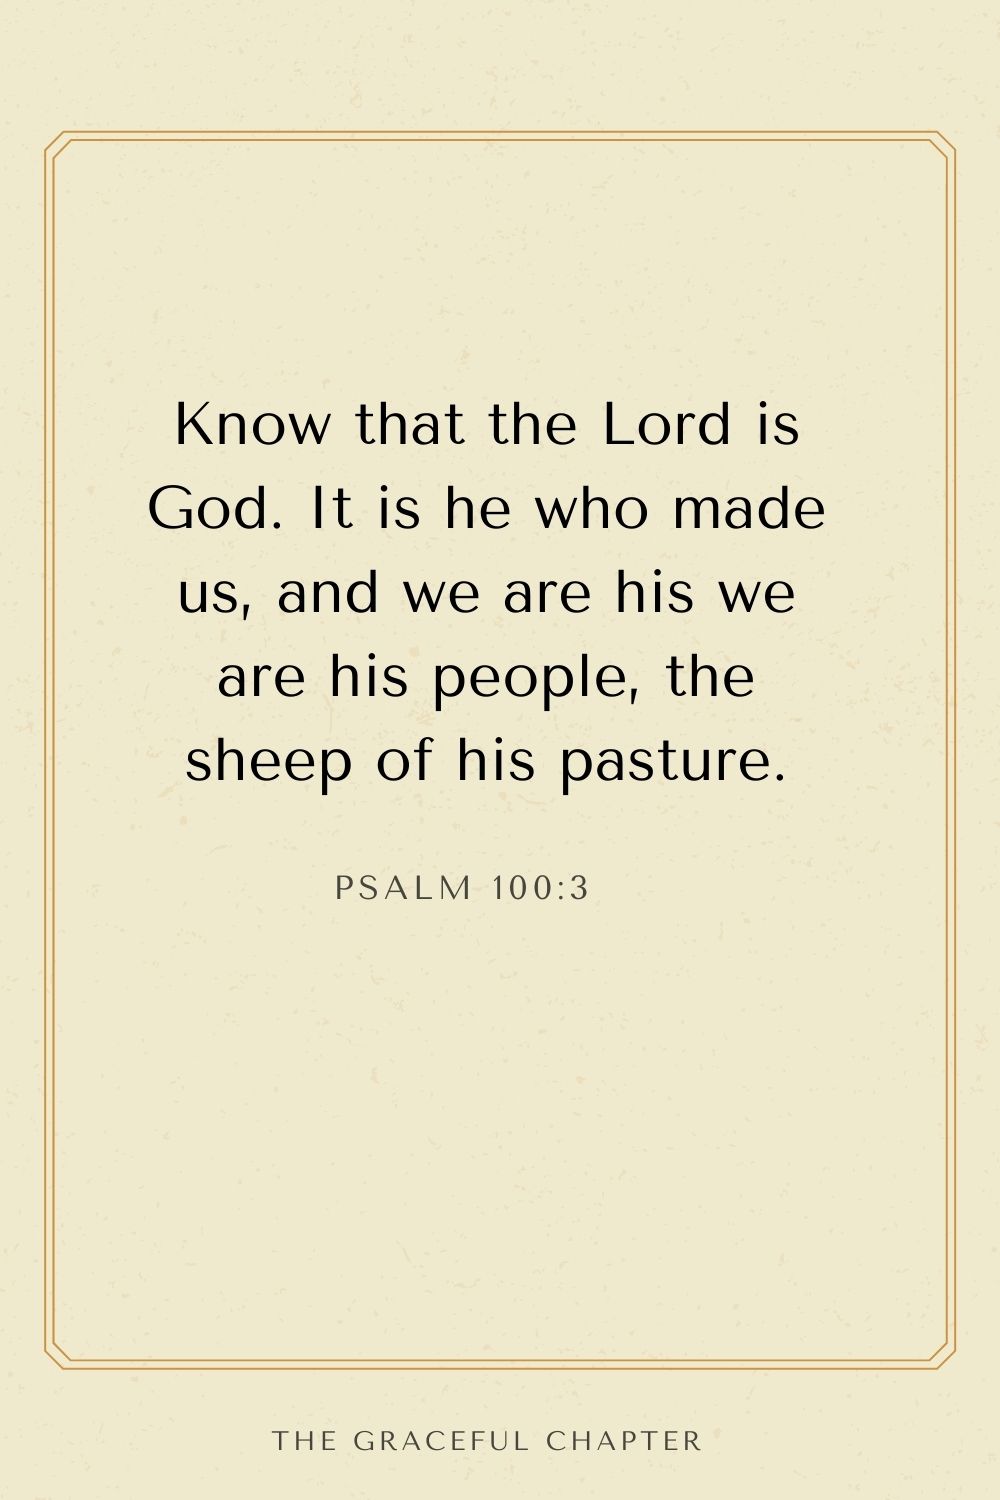 Know that the Lord is God. It is he who made us, and we are his we are his people, the sheep of his pasture. Psalm 100:3